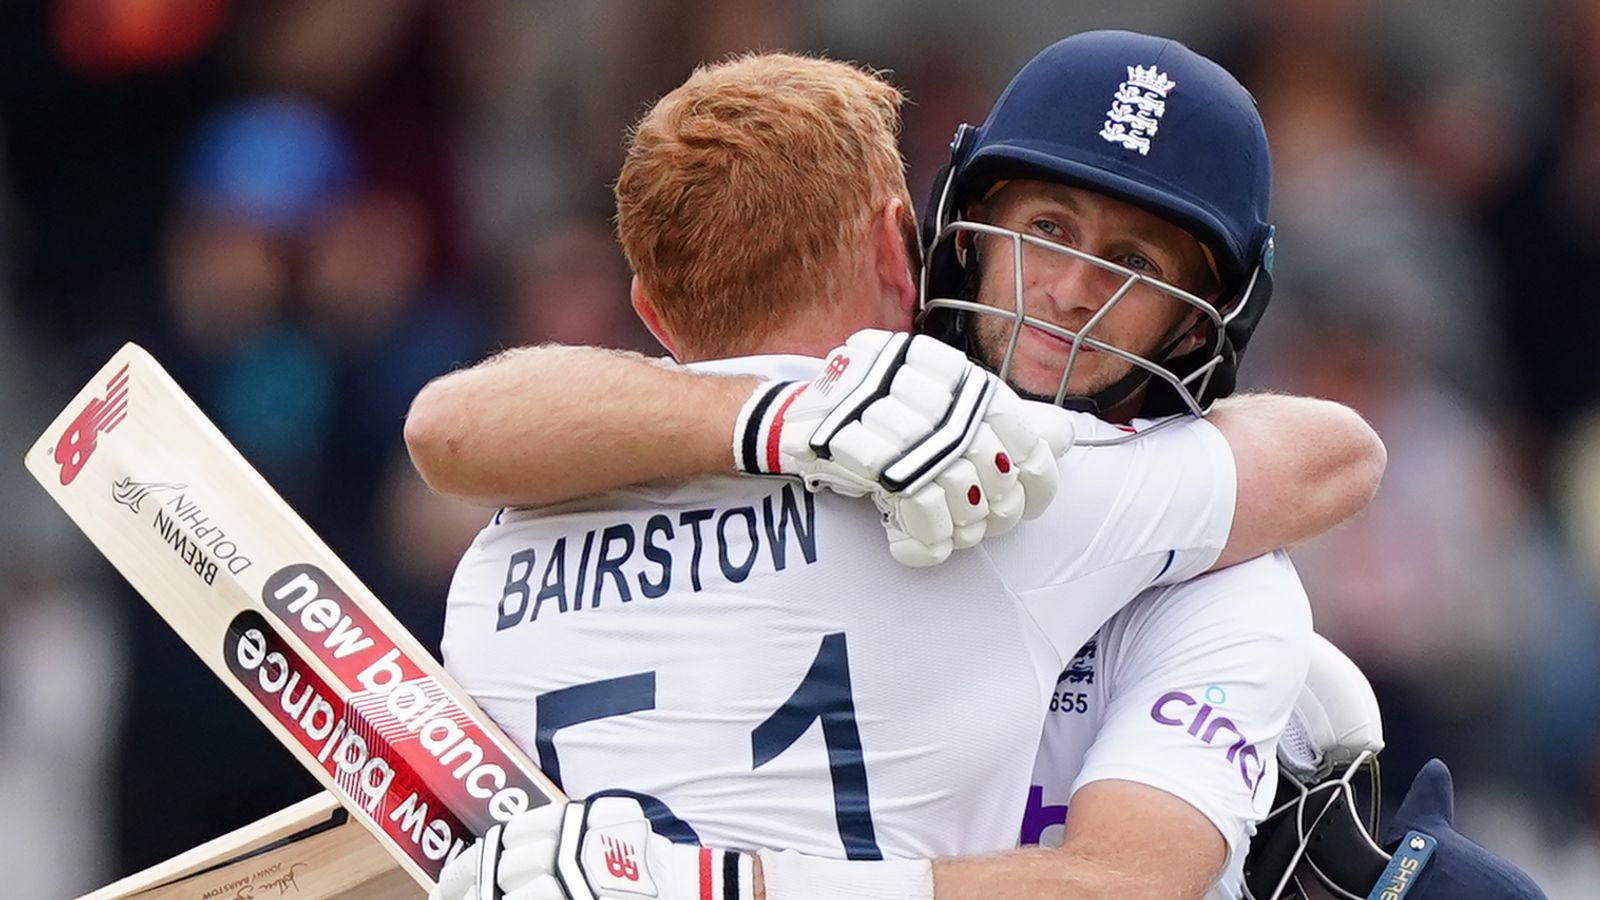 Joe Root and Jonny Bairstow put England on the cusp of famous final-Test win over India as record run chase in sight